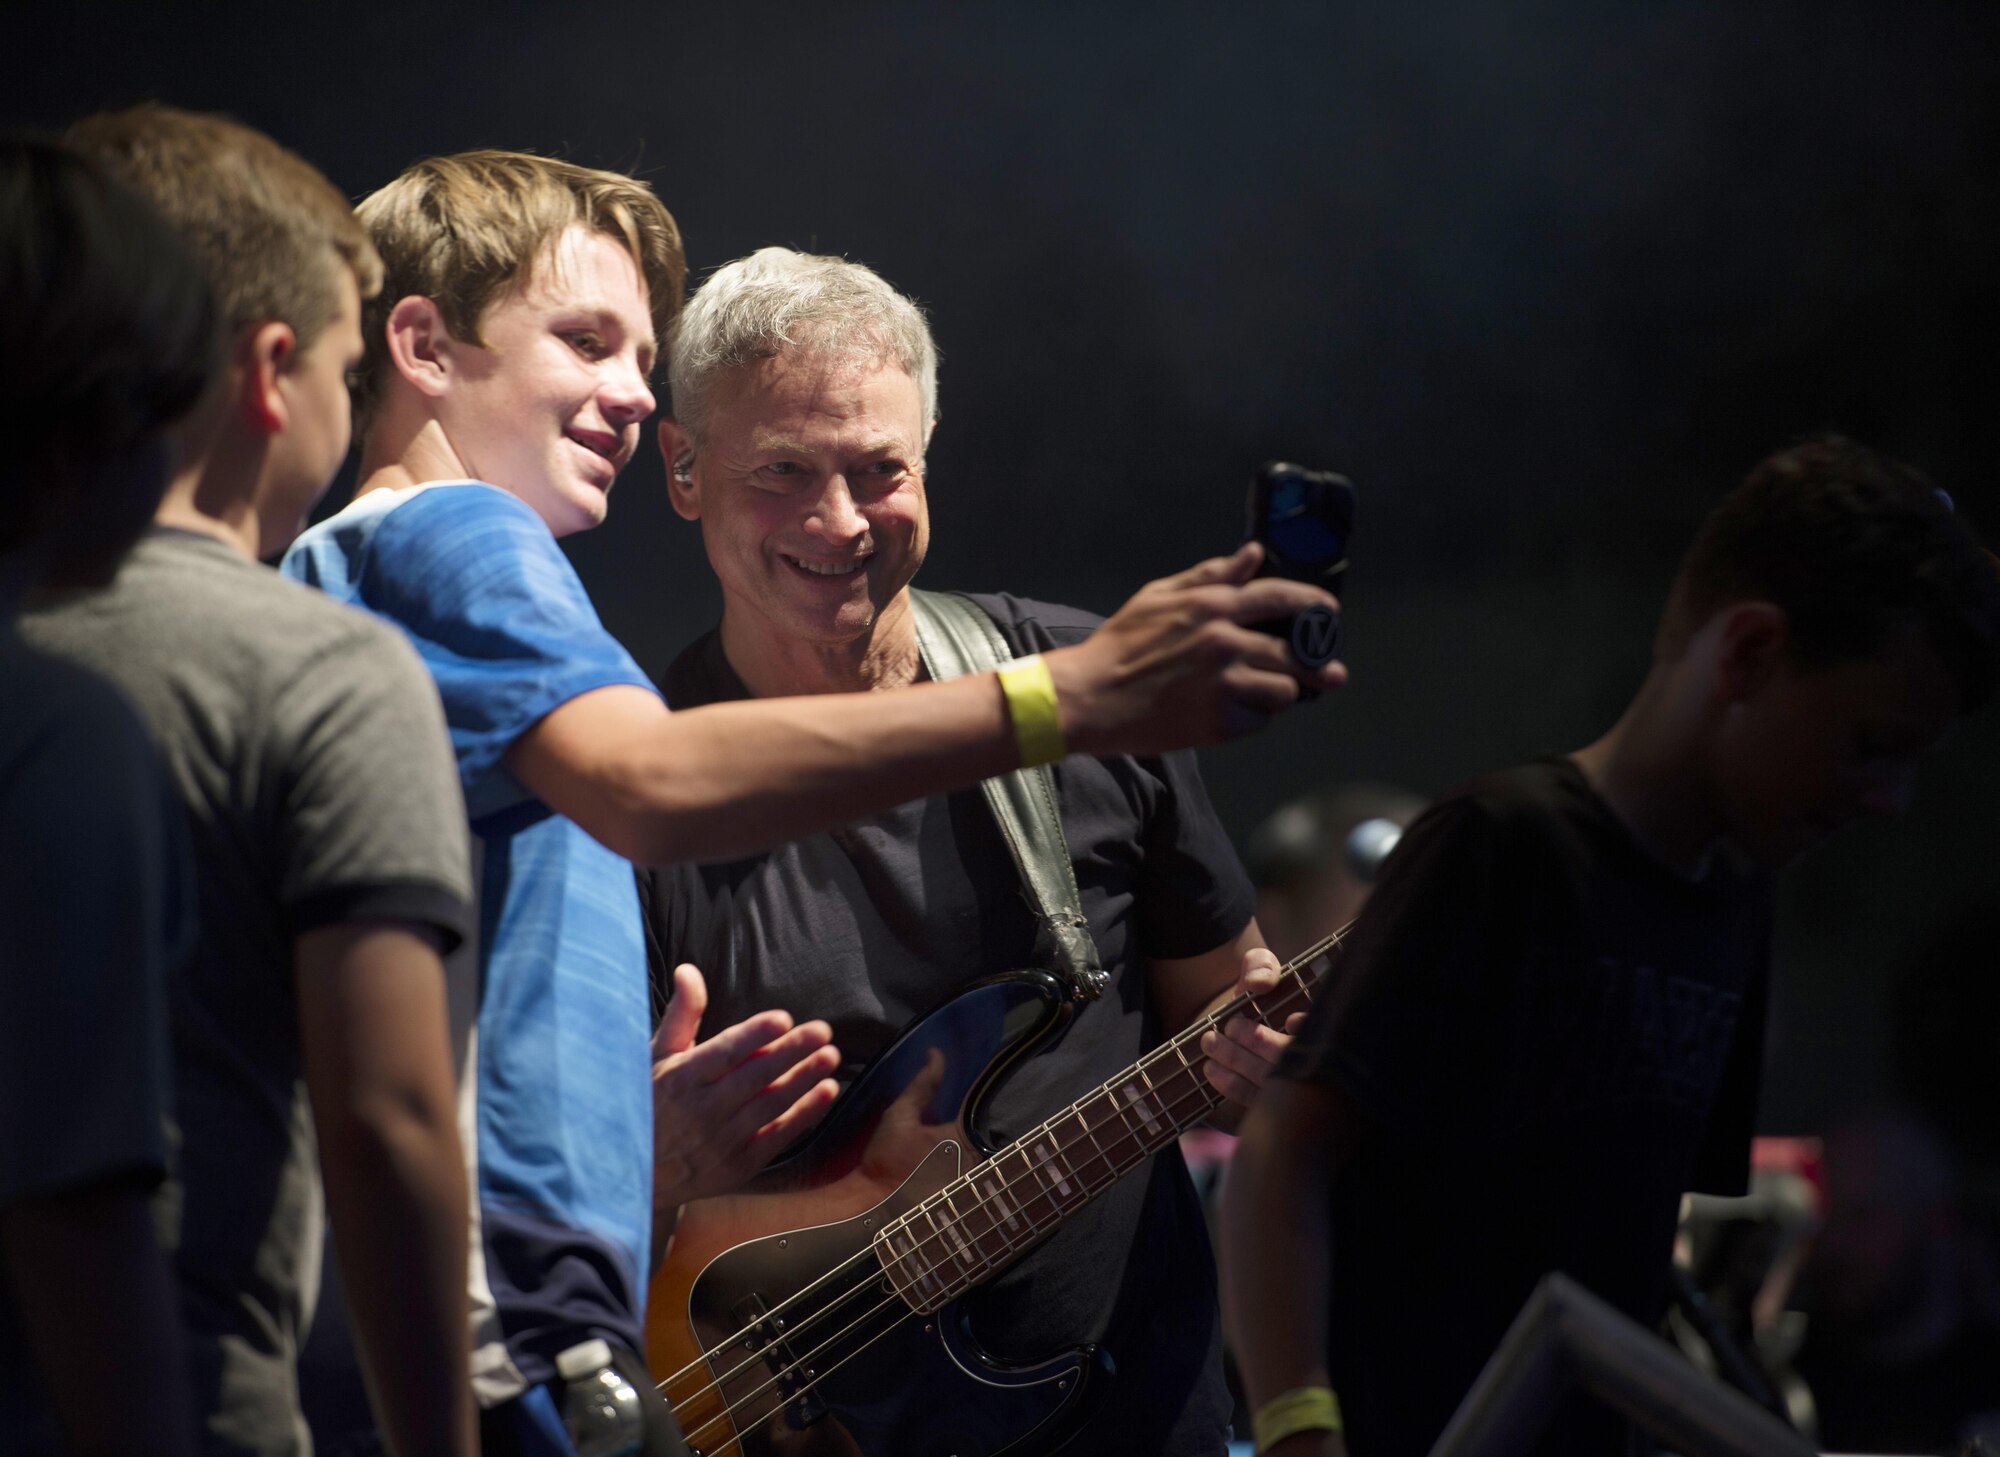 Gary Sinise, bassist for the Lt. Dan Band, takes a photo with MacDill youth during a performance at MacDill Air Force Base, Fla., April 29, 2017. This performance marked the first time the Lt. Dan Band has visited MacDill. (U.S. Air Force photo by Airman 1st Class Adam R. Shanks)